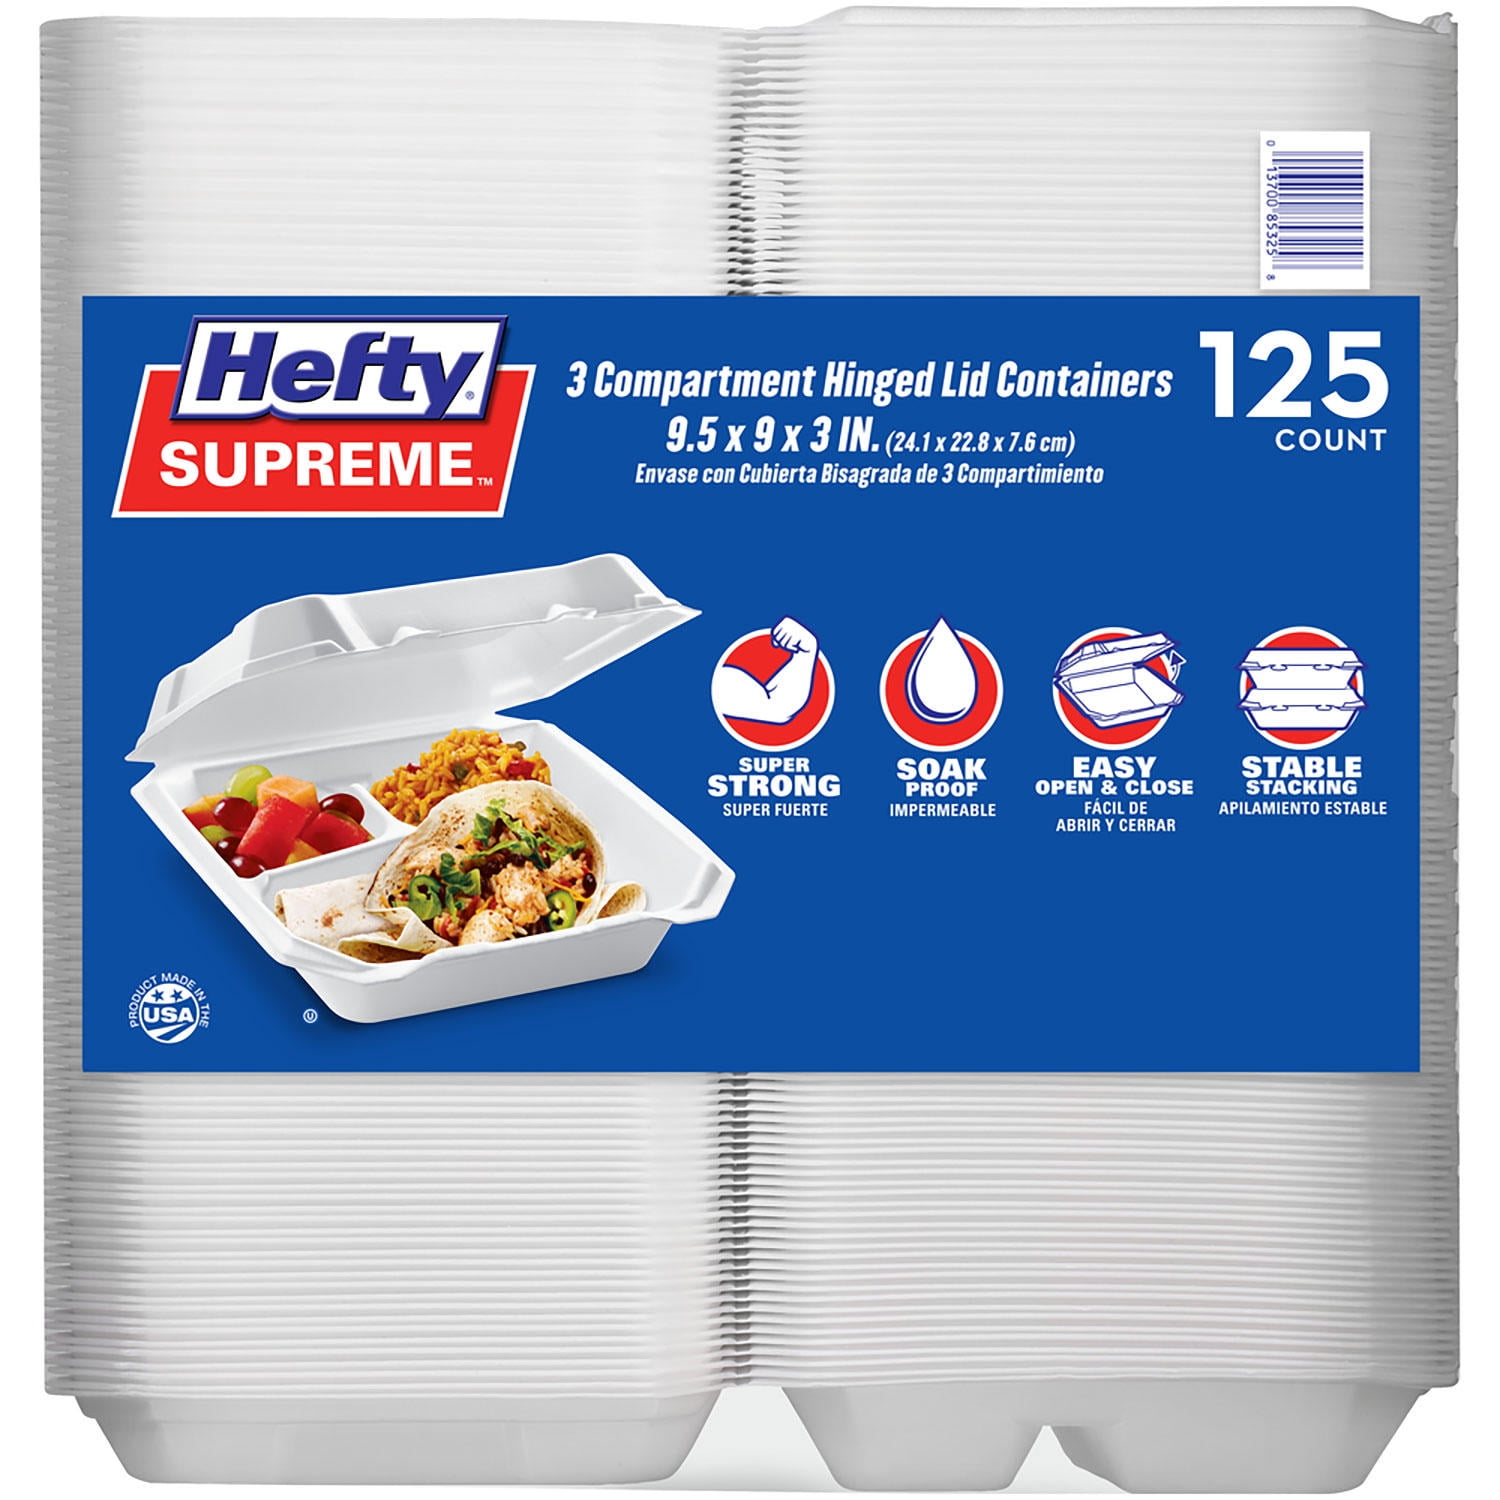 Hefty Supreme Foam Hinged Lid Container, 1-Compartment (125 ct